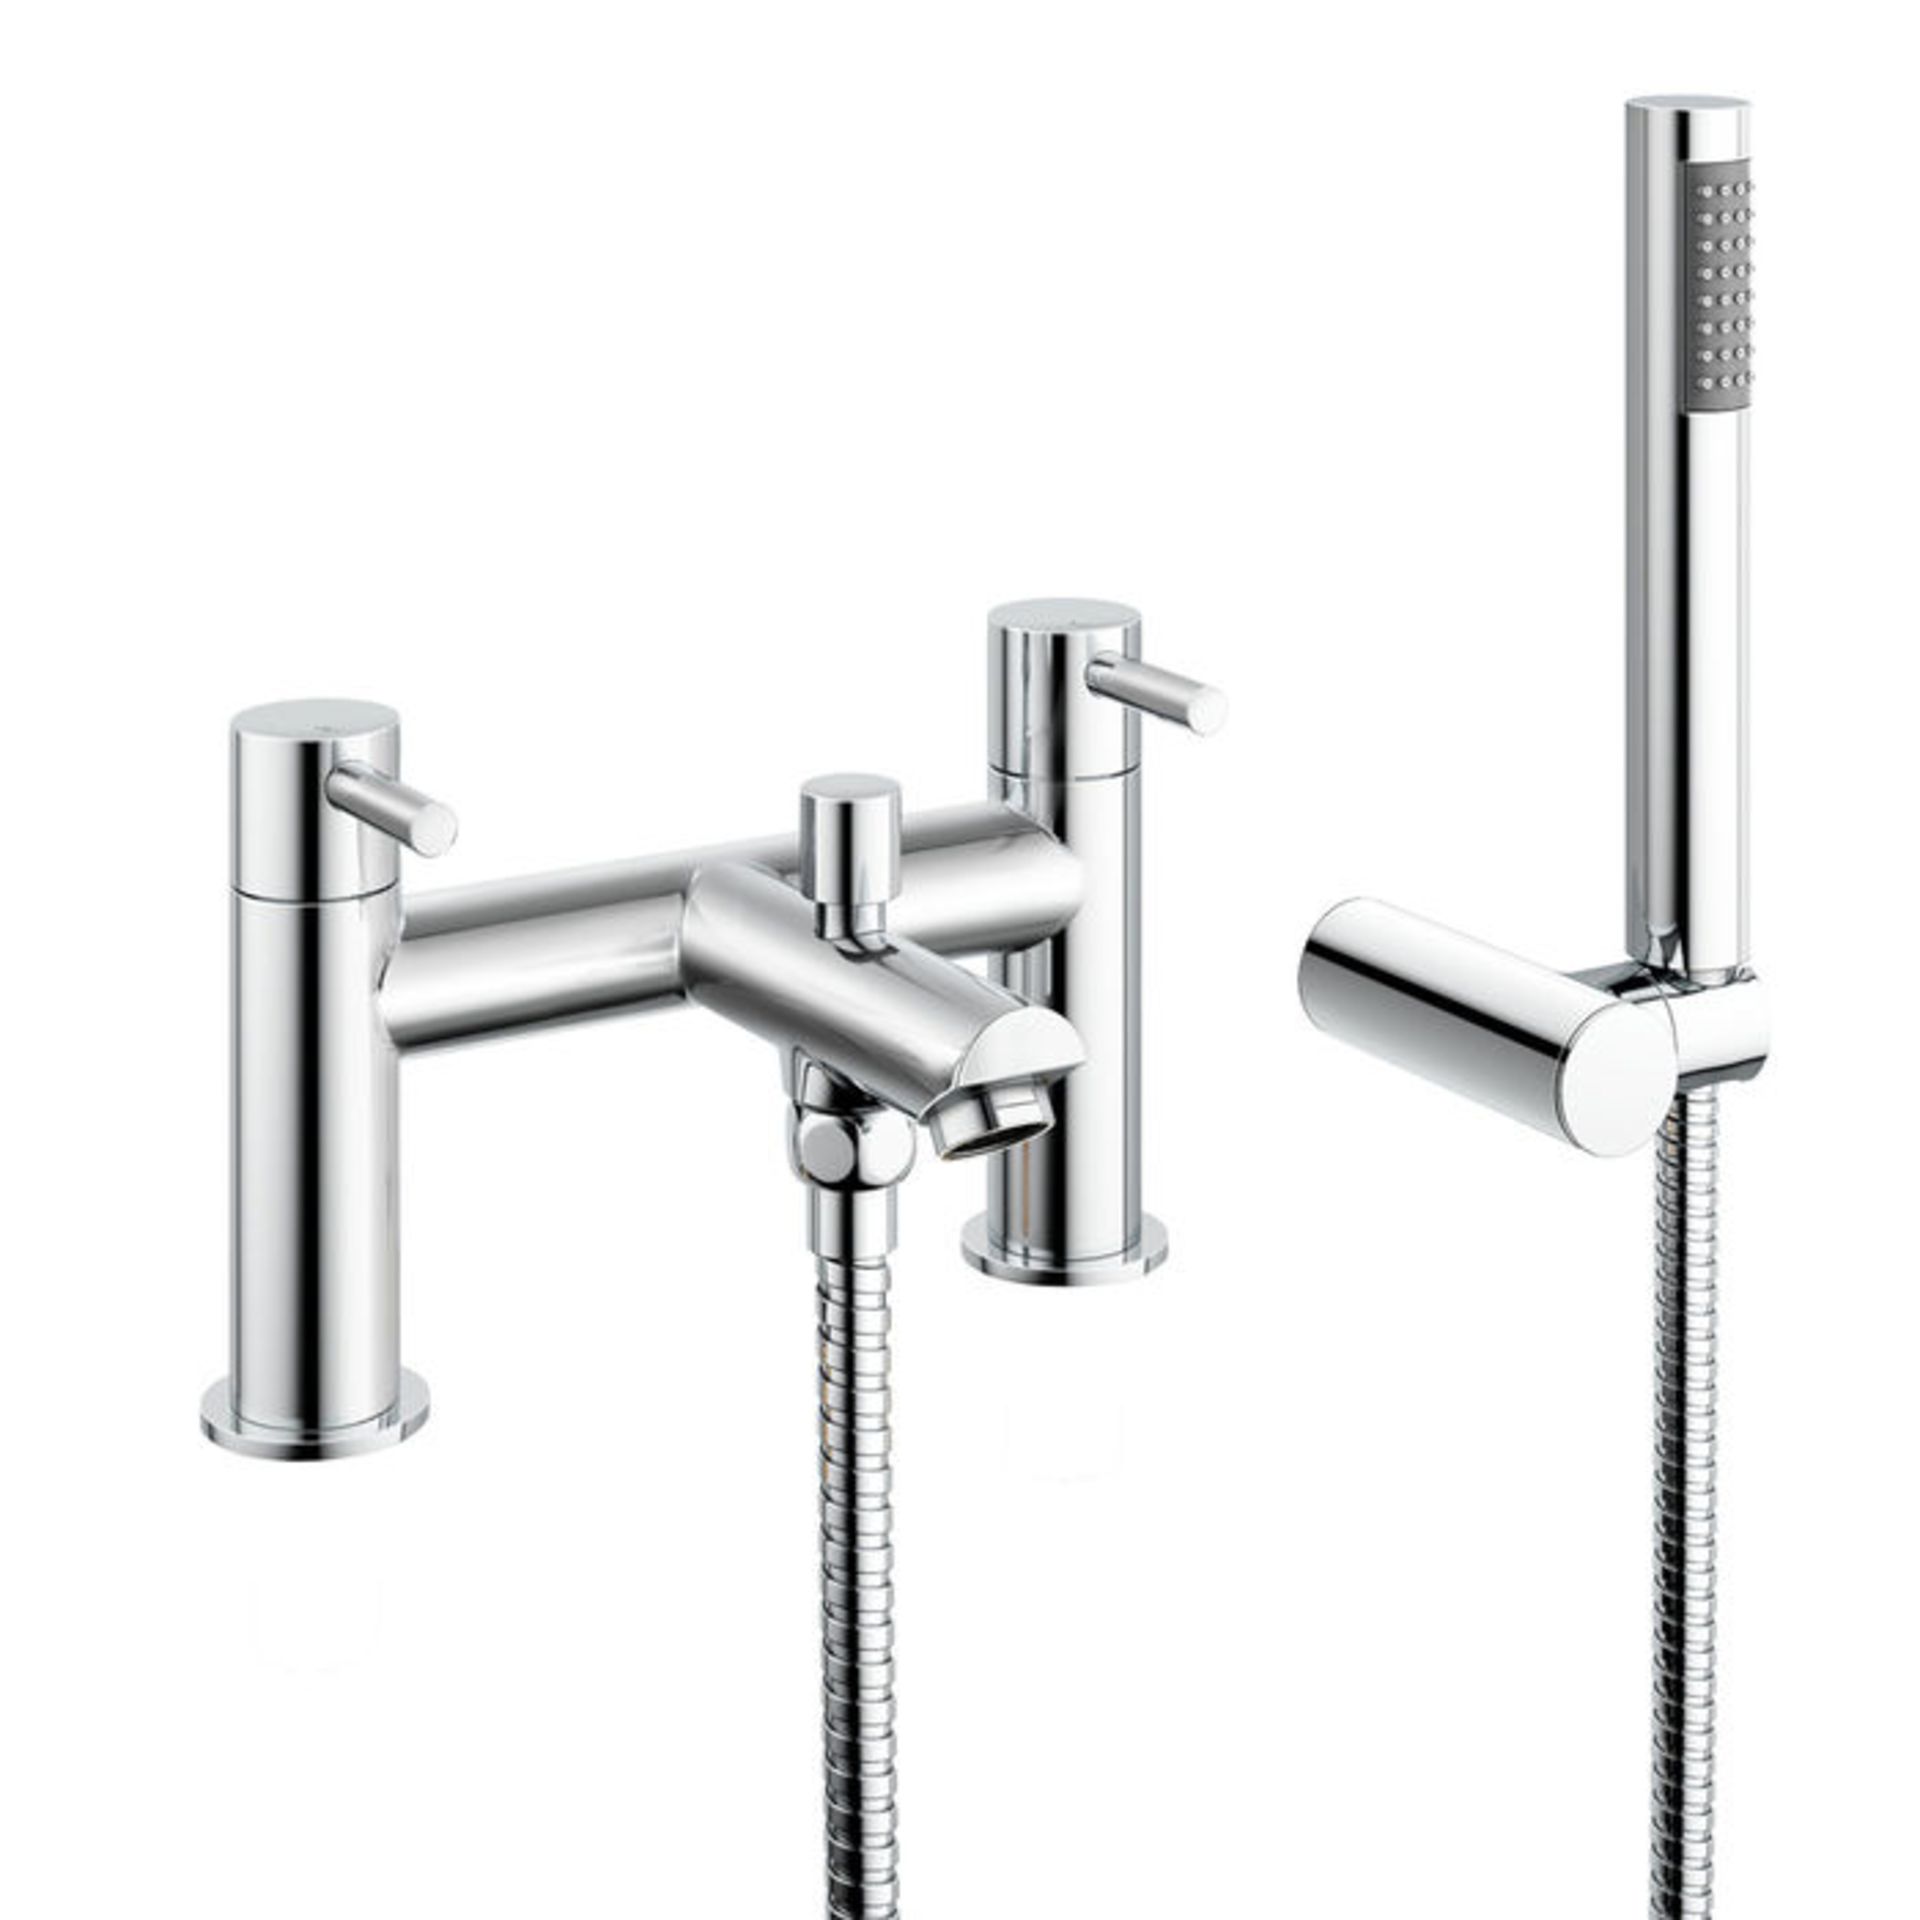 (TS184) Gladstone II Bath Mixer Shower Tap with Hand Held Chrome plated solid brass 1/4 turn solid - Image 2 of 3